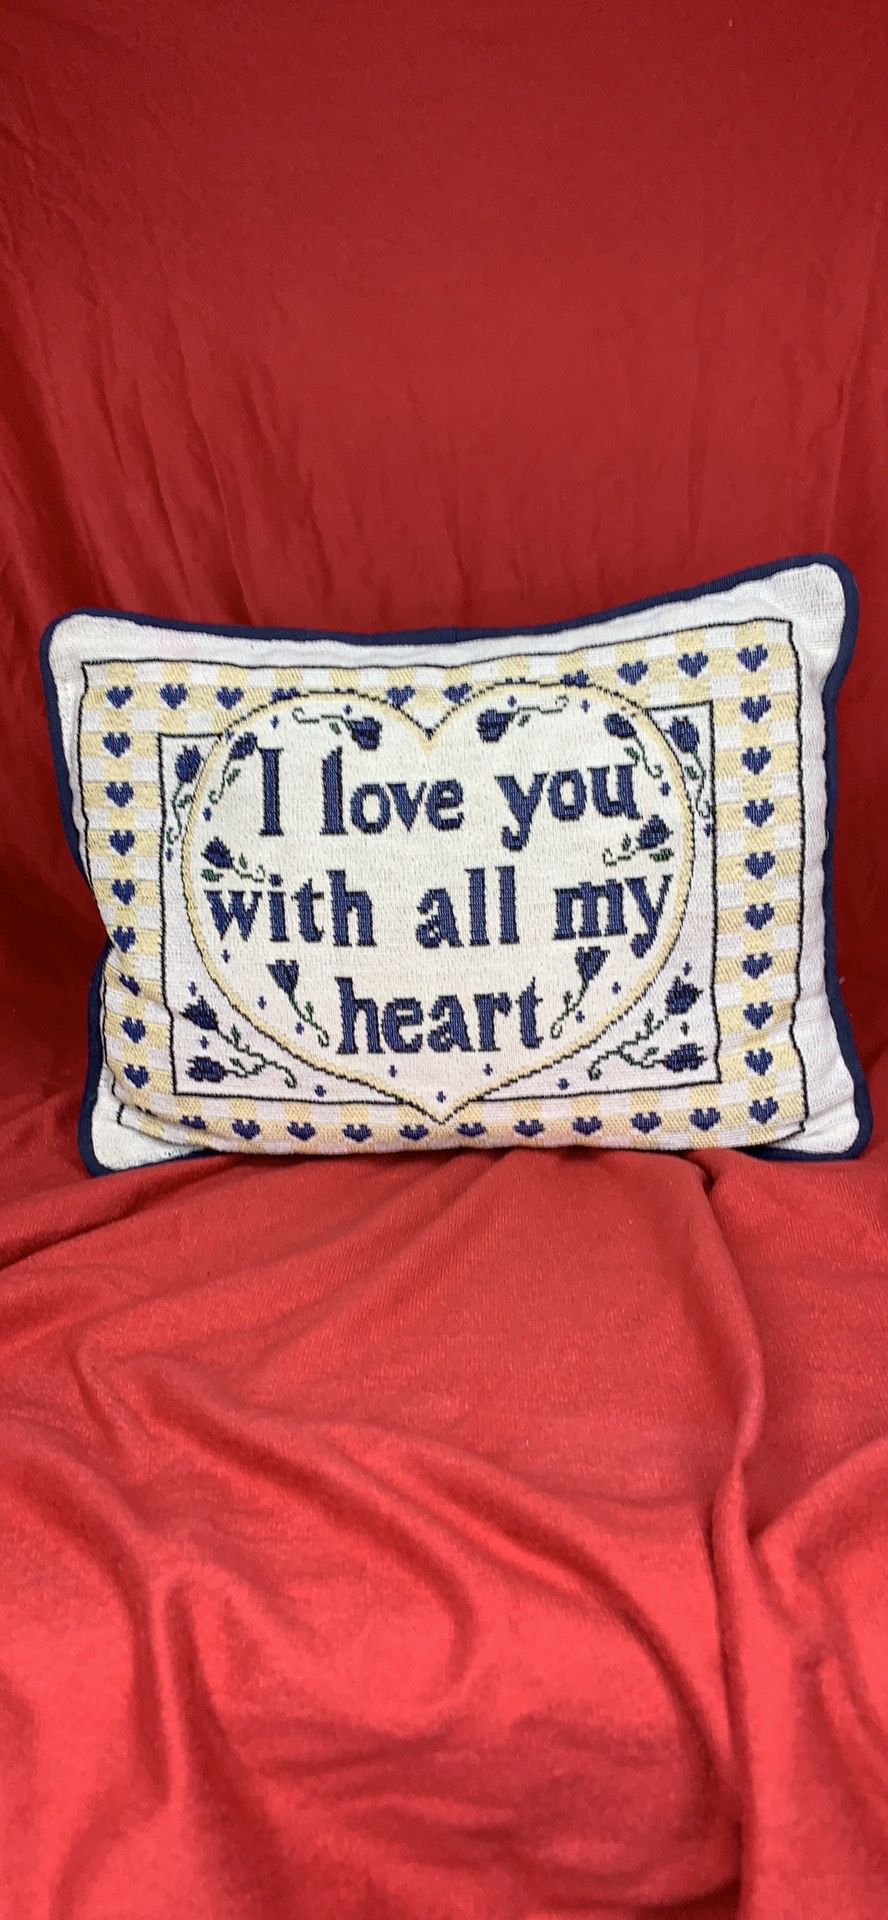 Brand New Pillow “I love you with all my heart “